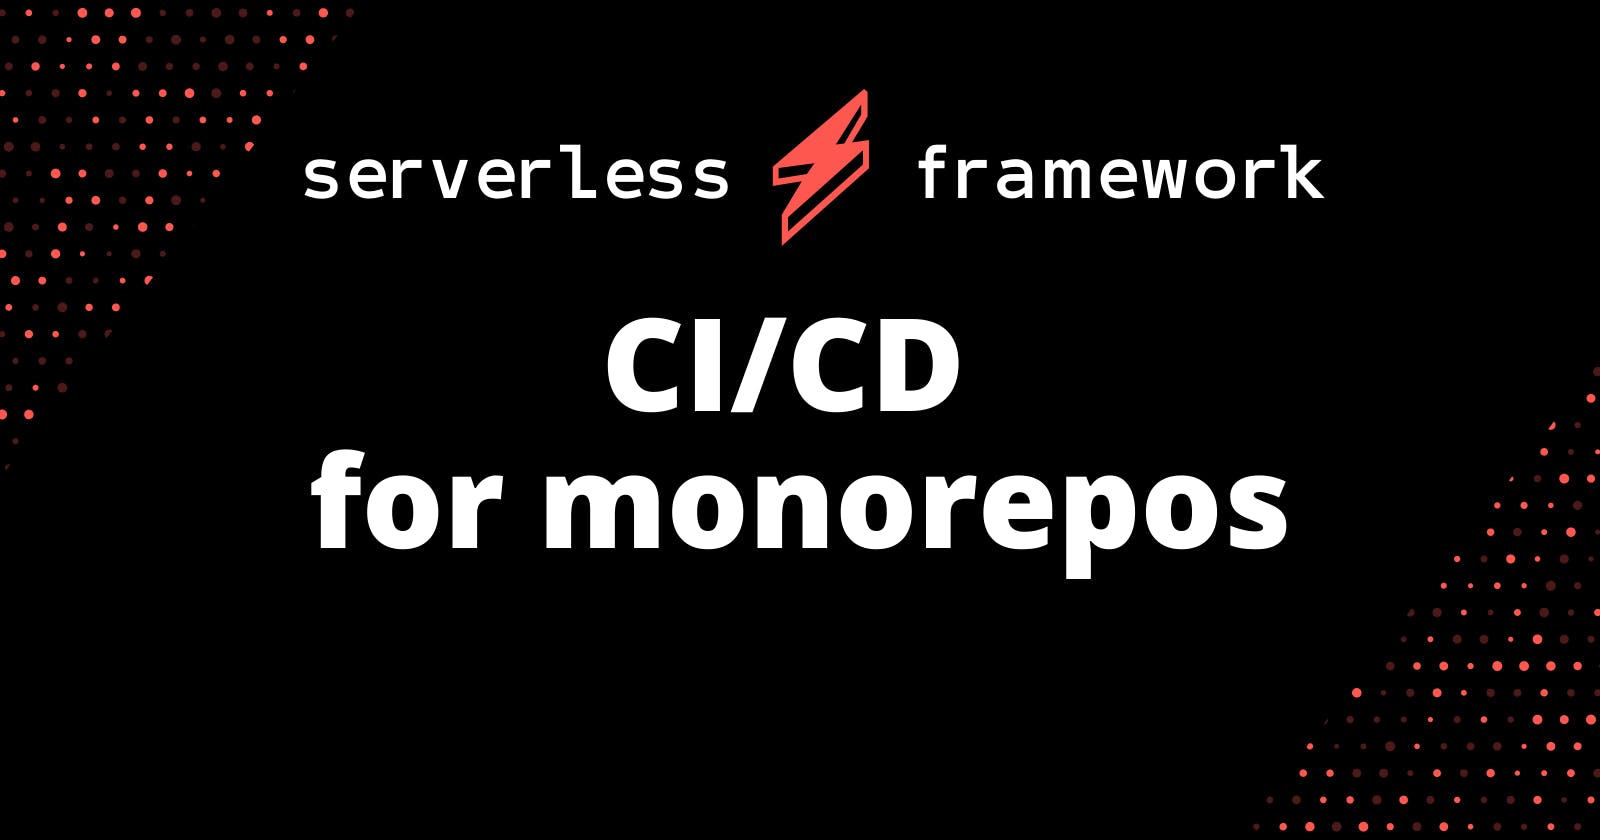 CI/CD for monorepos